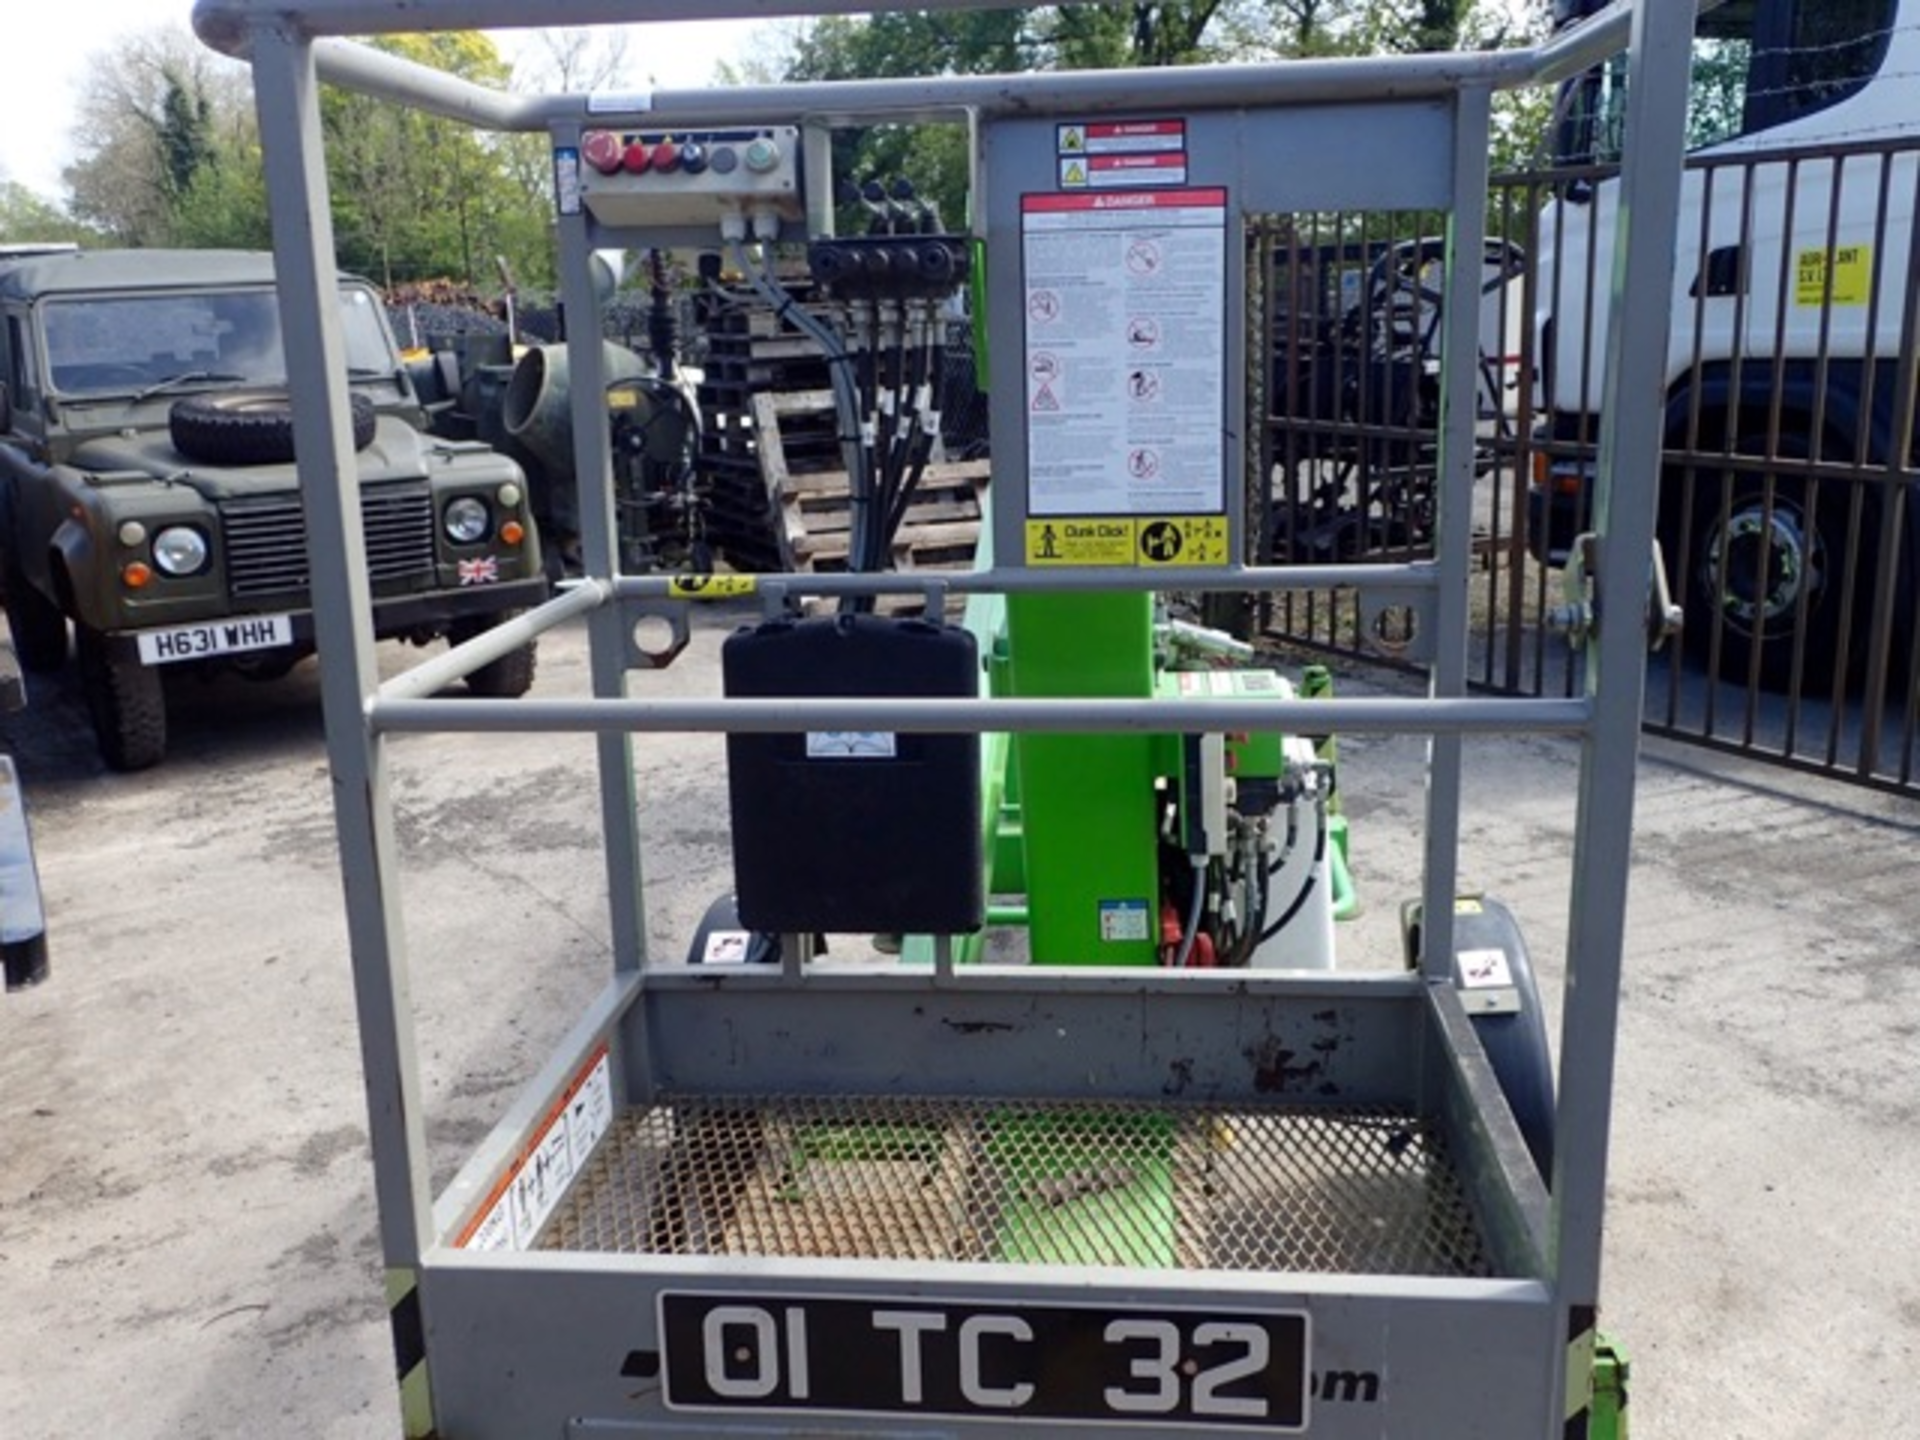 Nifty 120 12 metre towable electric boom lift access platform Year: 2012 S/N: 0121292 - Image 5 of 9